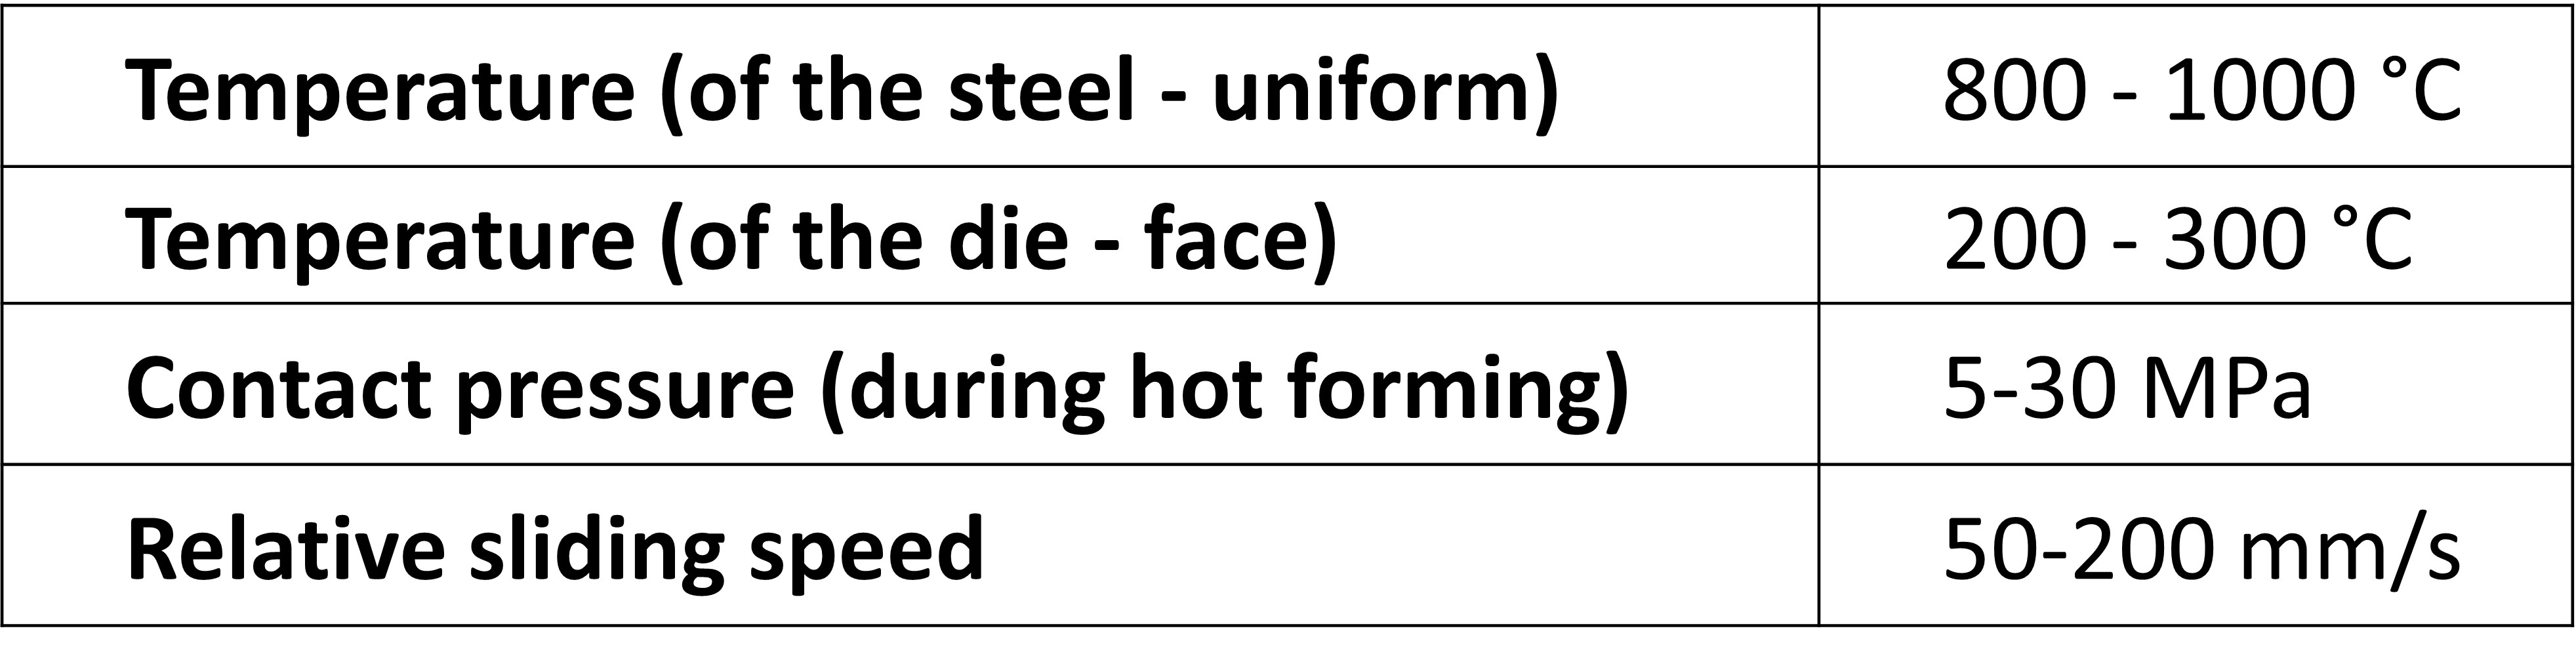 Table - General operating conditions during hot metal forming